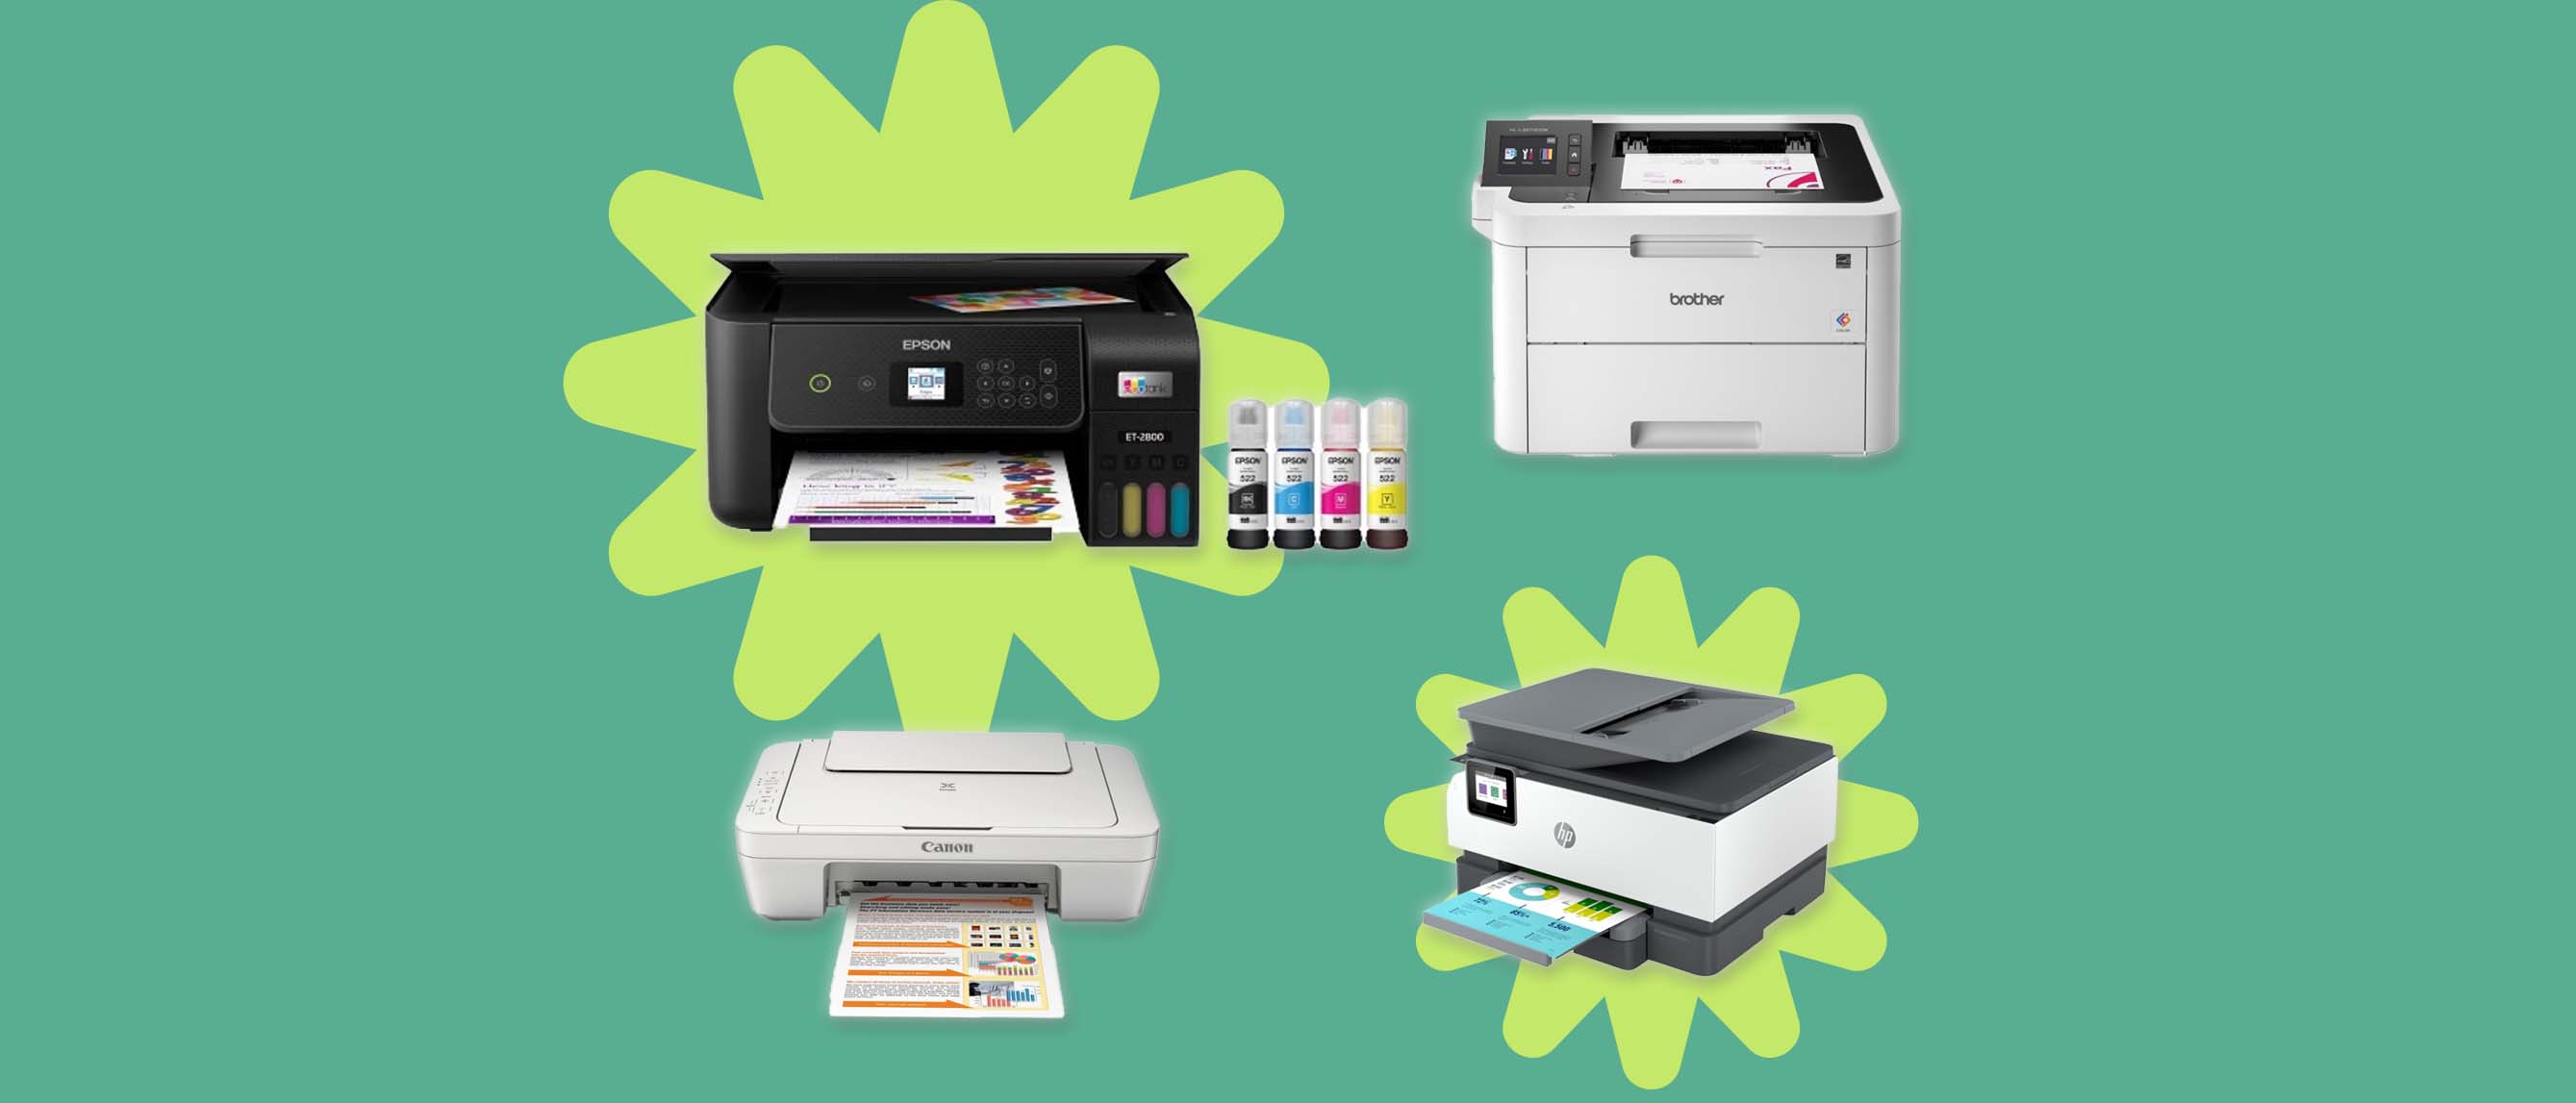 Image of four home printers including Canon, Brothers, HP and Epson